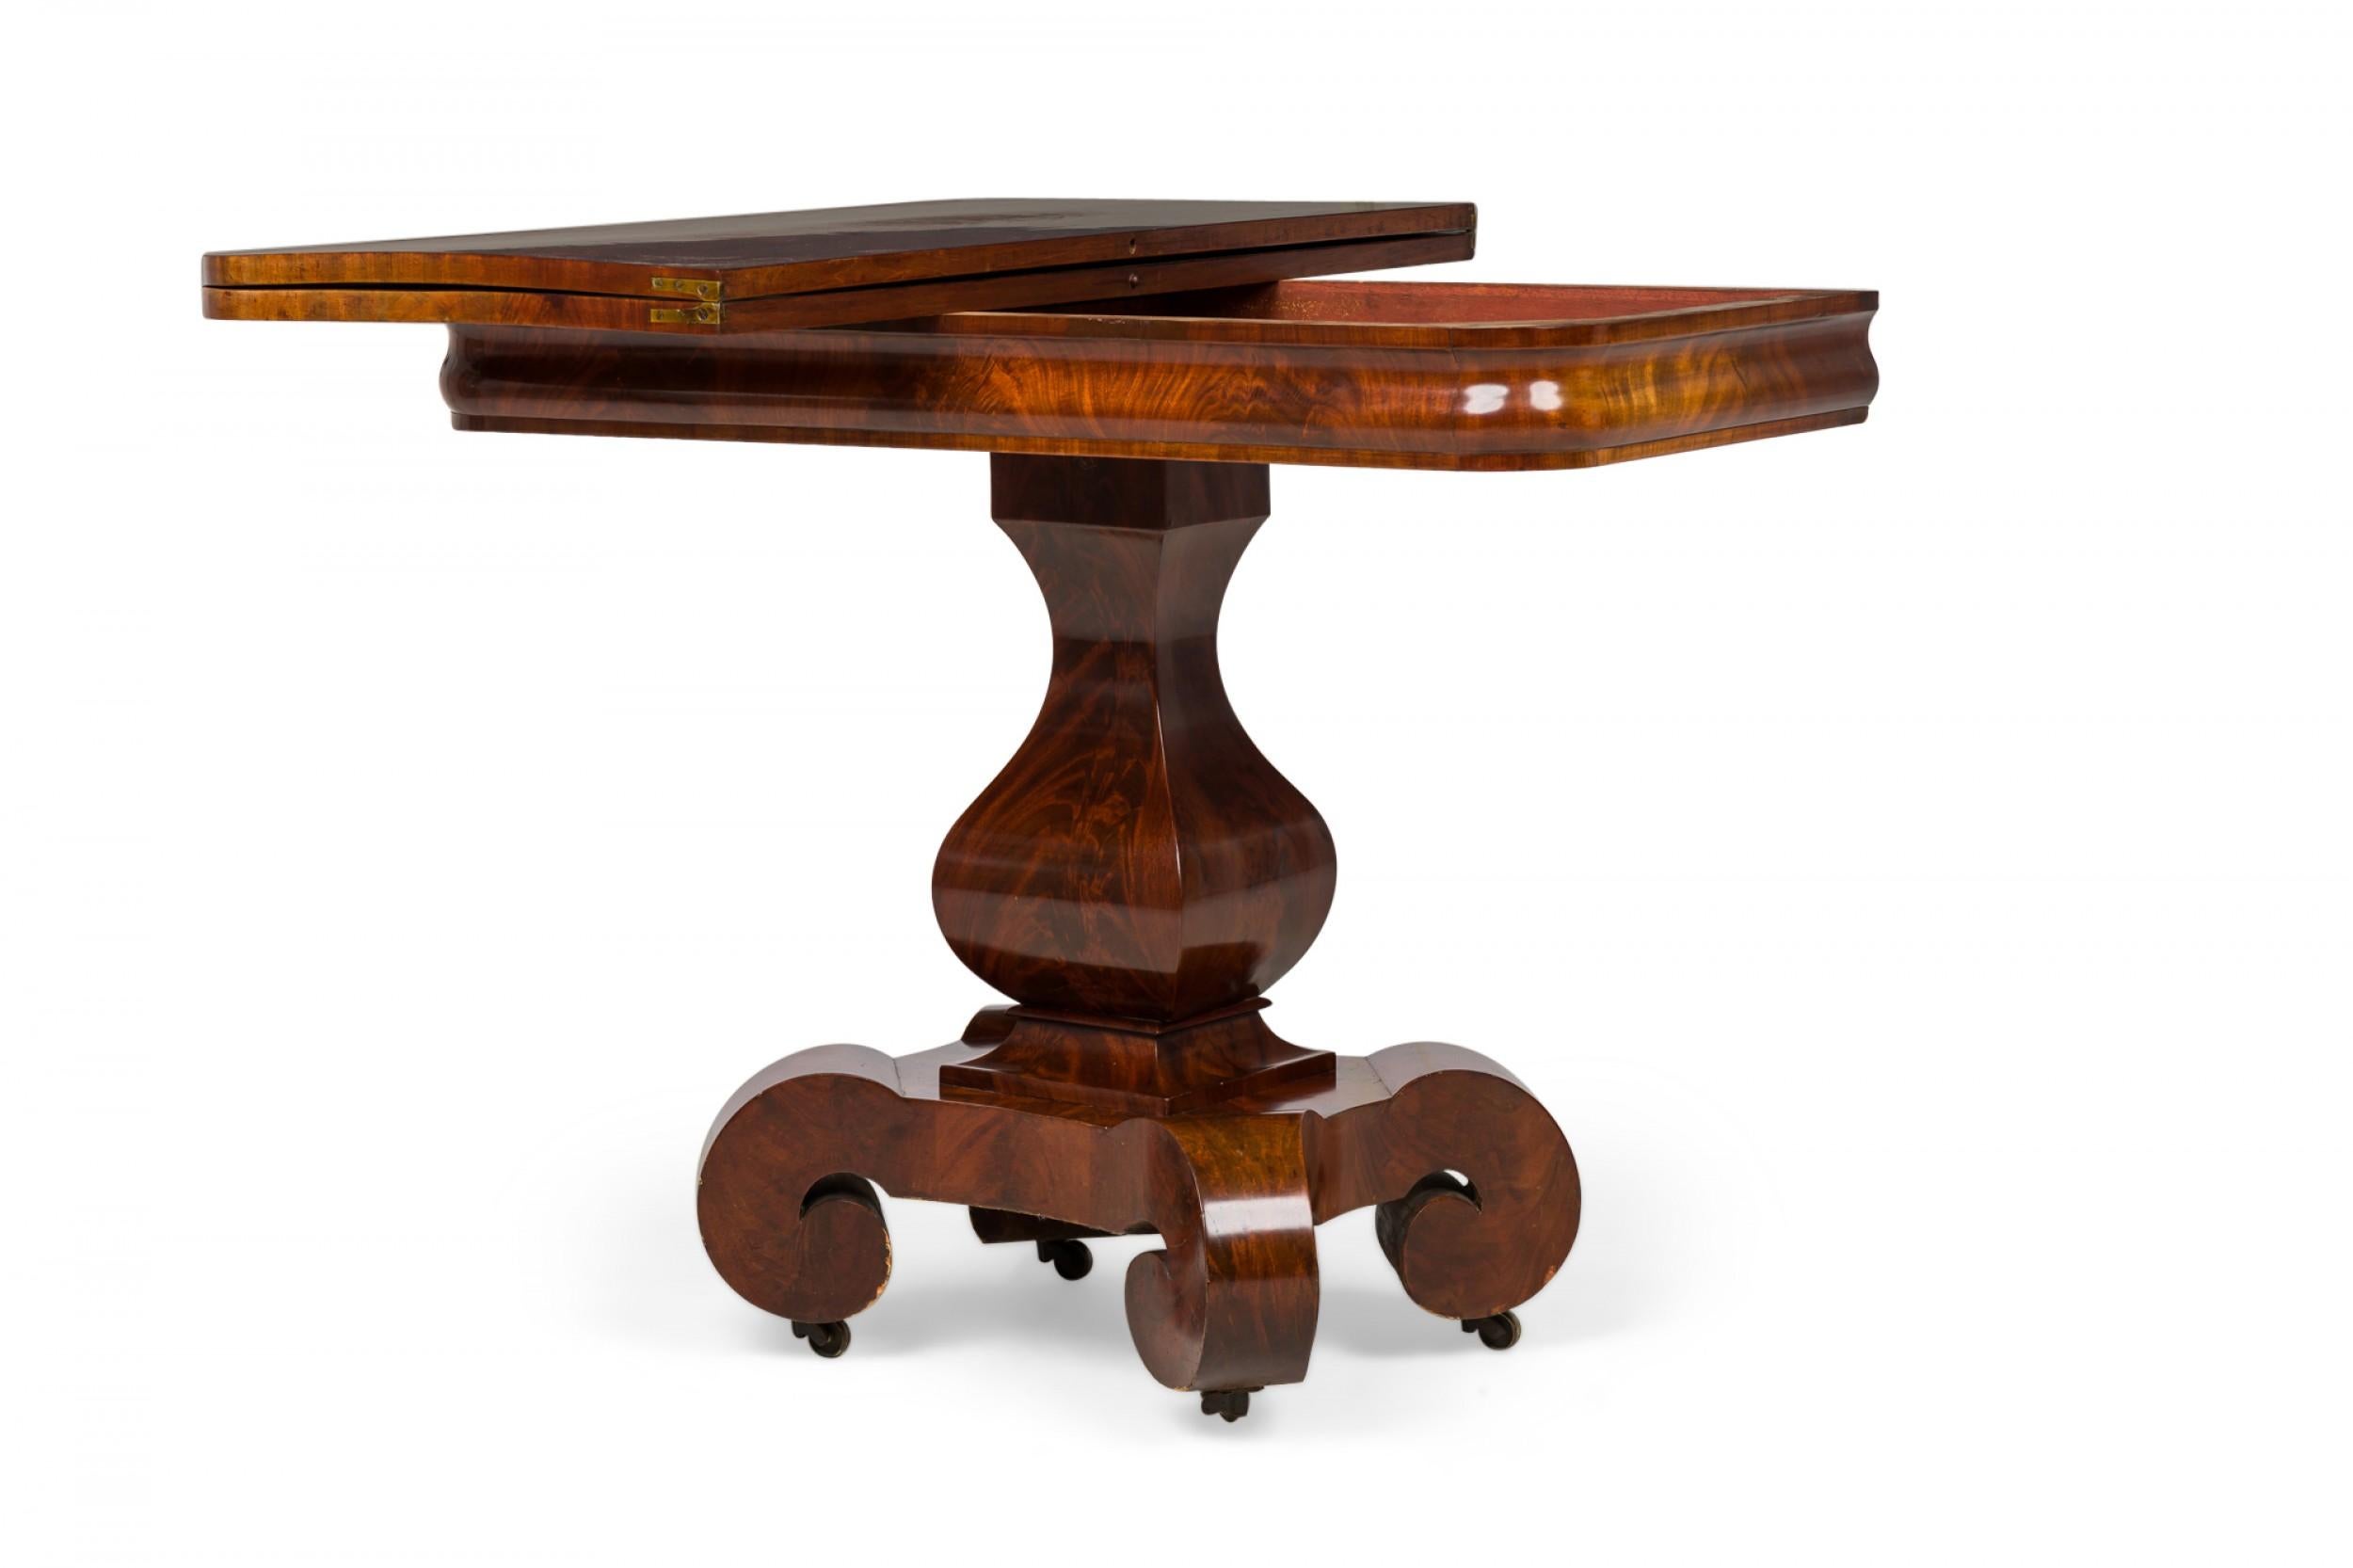 American Empire folding rectangular side table with a sliding table top and extendable hinged leaf, resting on a baluster pedestal base ending in 4 flattened scroll legs with casters, finished in a mahogany veneer.